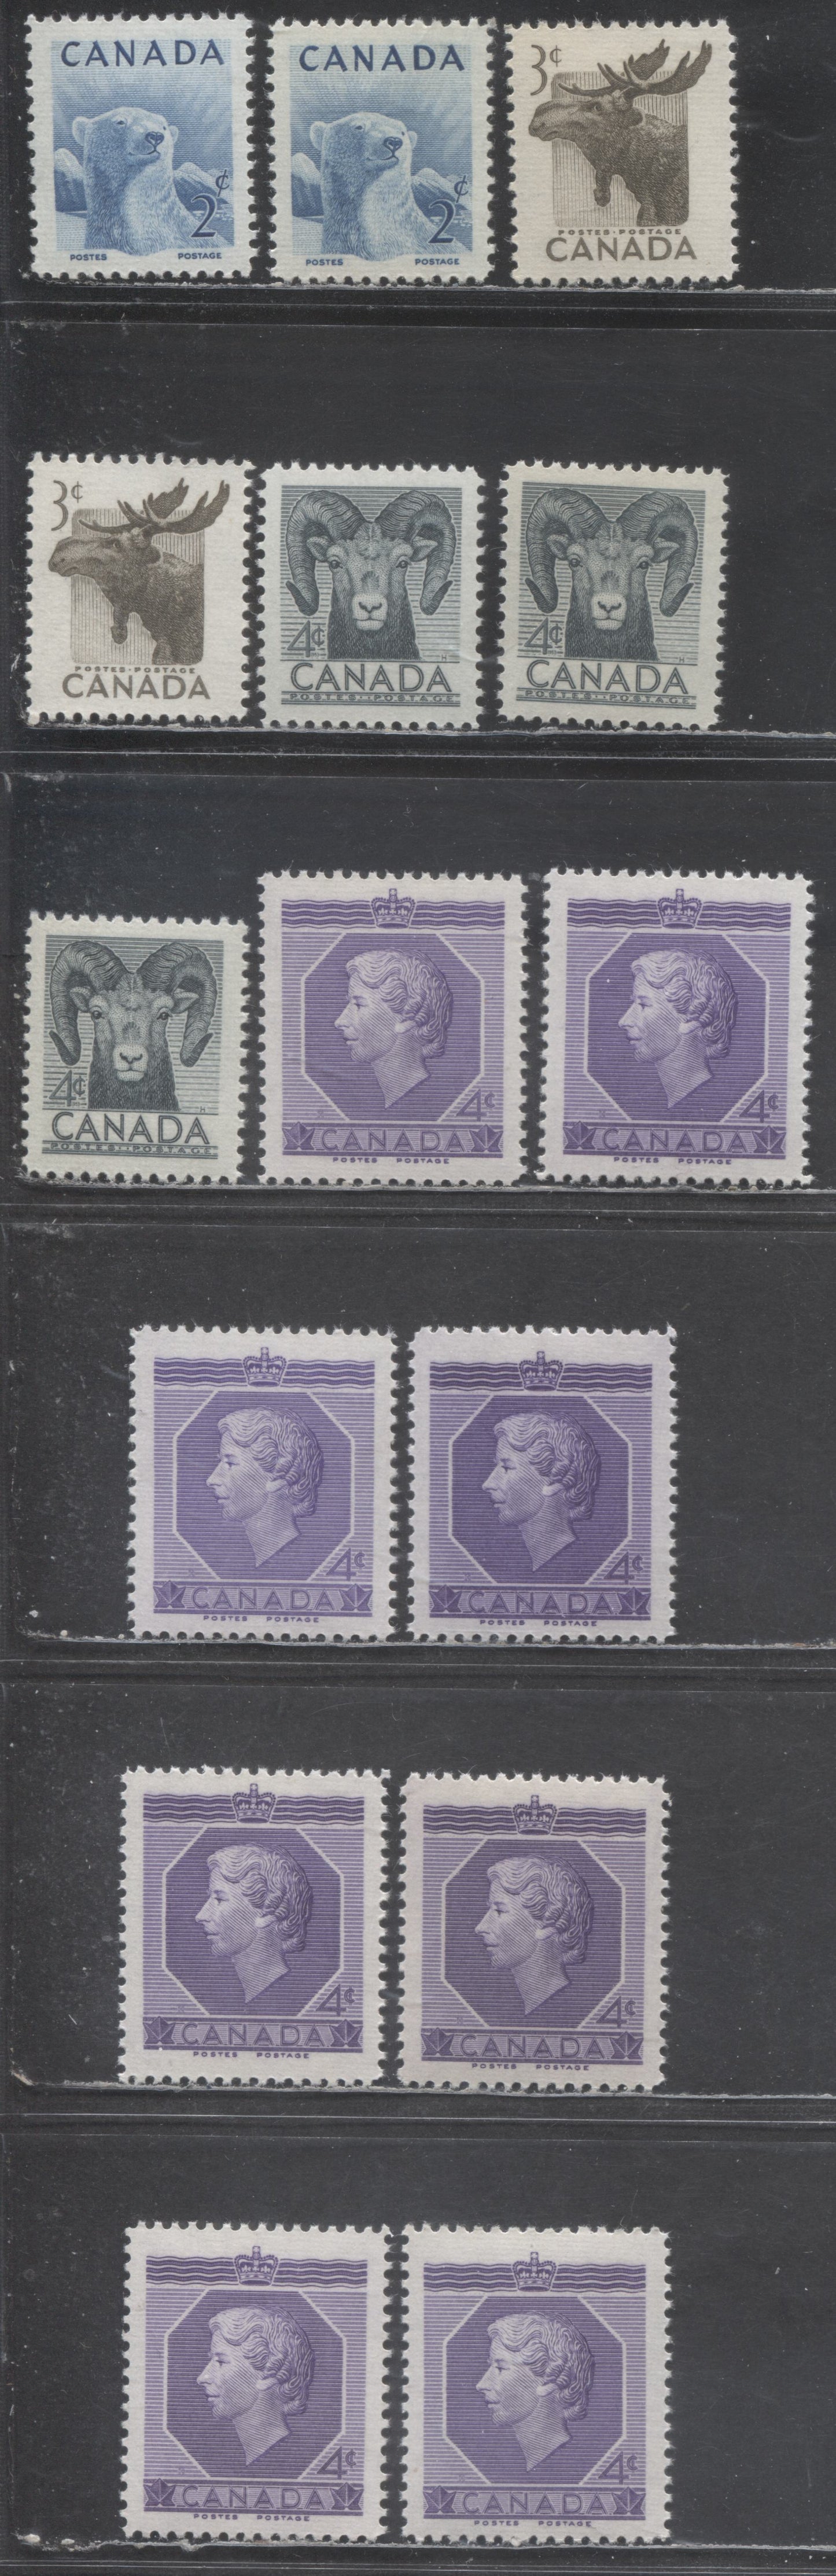 Canada #322-324, 330 2c-4c Various Colours Various Subjects, 1951-1953 Royal Visit Issue - 1953 Coronation Issue, 15 VFNH Singles, Smooth & Horiziontally Ribbed Papers, Many Shades Cream & Yellowish Cream Semi-Gloss Gum